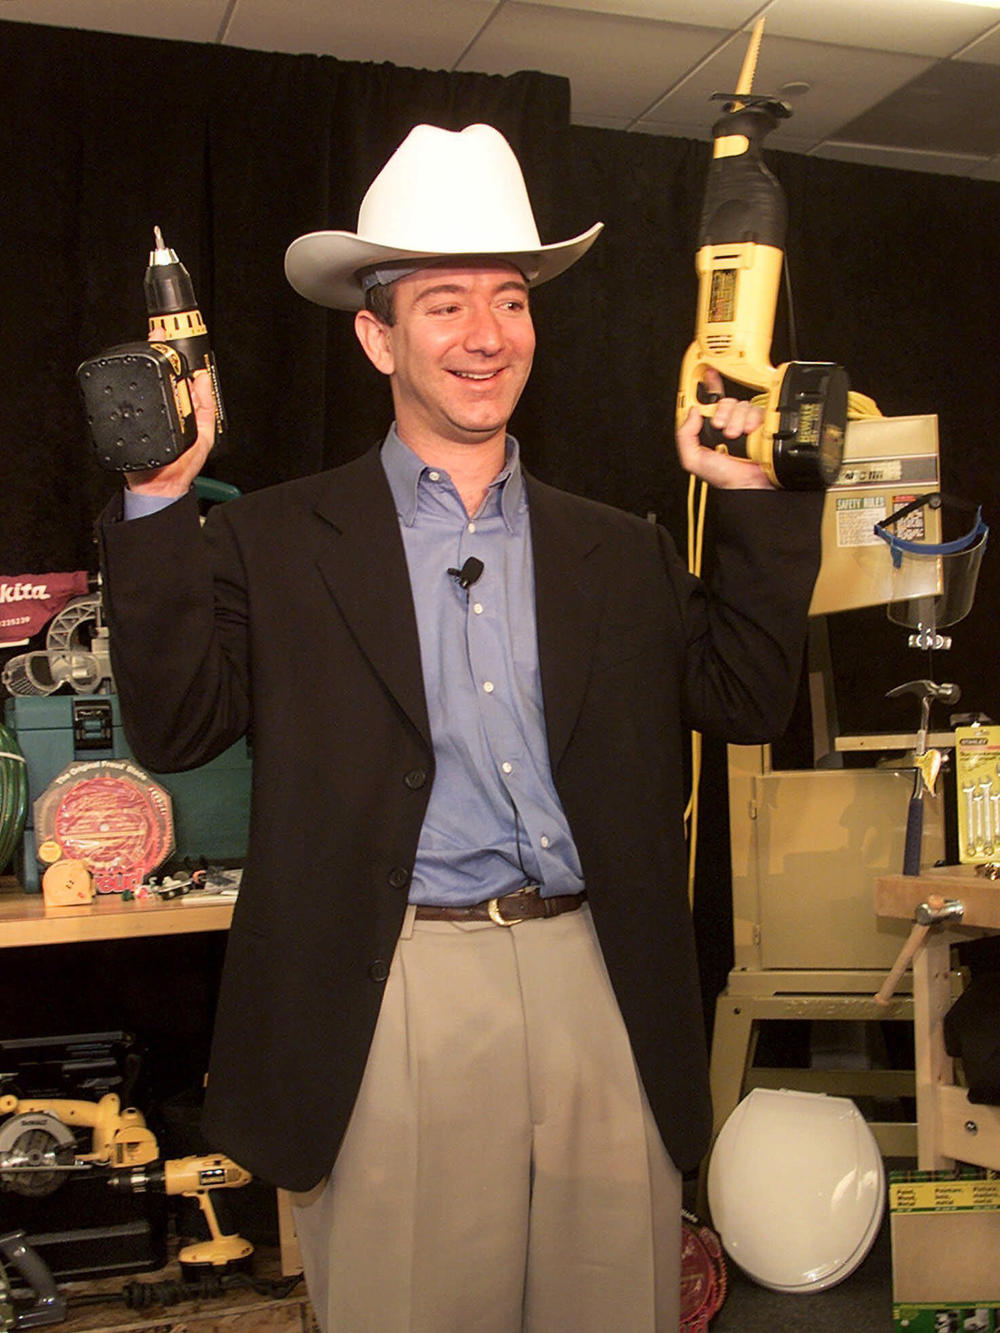 With Amazon expanding its selection, Bezos poses with a power drill and reciprocating saw in a Western-style hard hat at a 1999 news conference in New York.